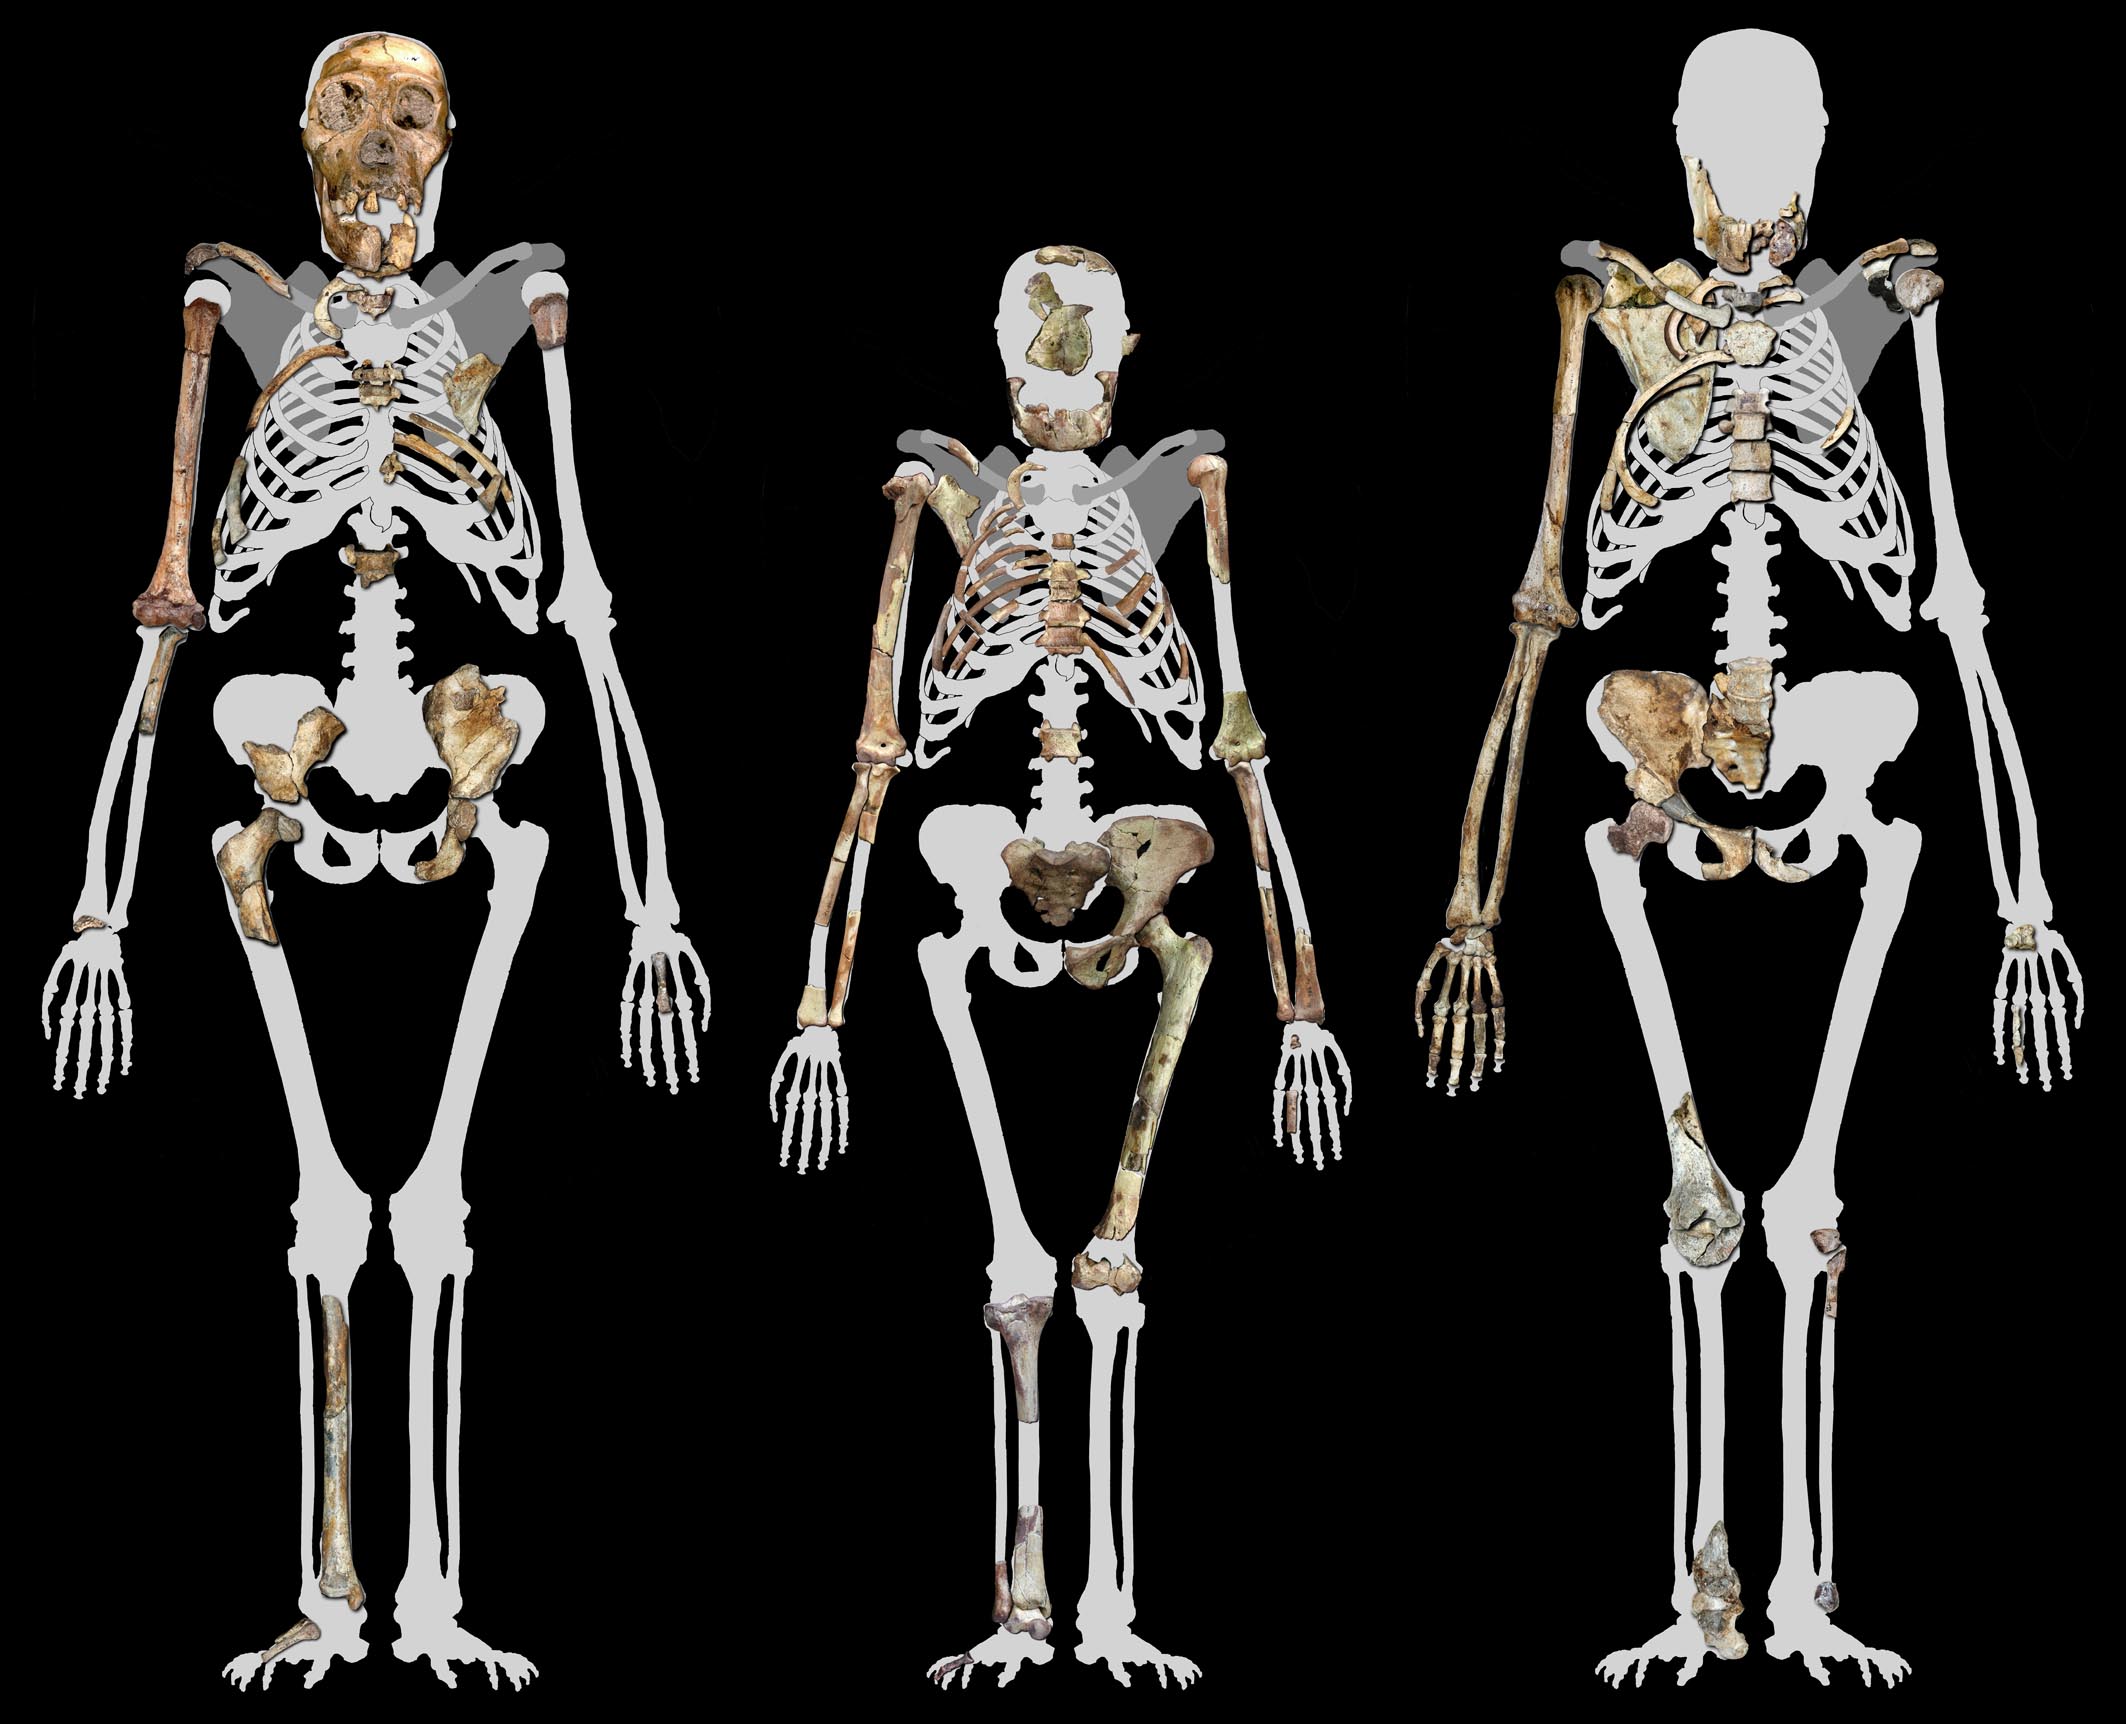 Image of three Australopithecus skeletons in a row. The two outer skeletons are A. sediba and the center skeleton is A. afarensis. The center skeleton is much shorter than the skeletons to its left and right. Each skeleton is shown as a white silhouette on which the bones that are actually preserved and superimposed.